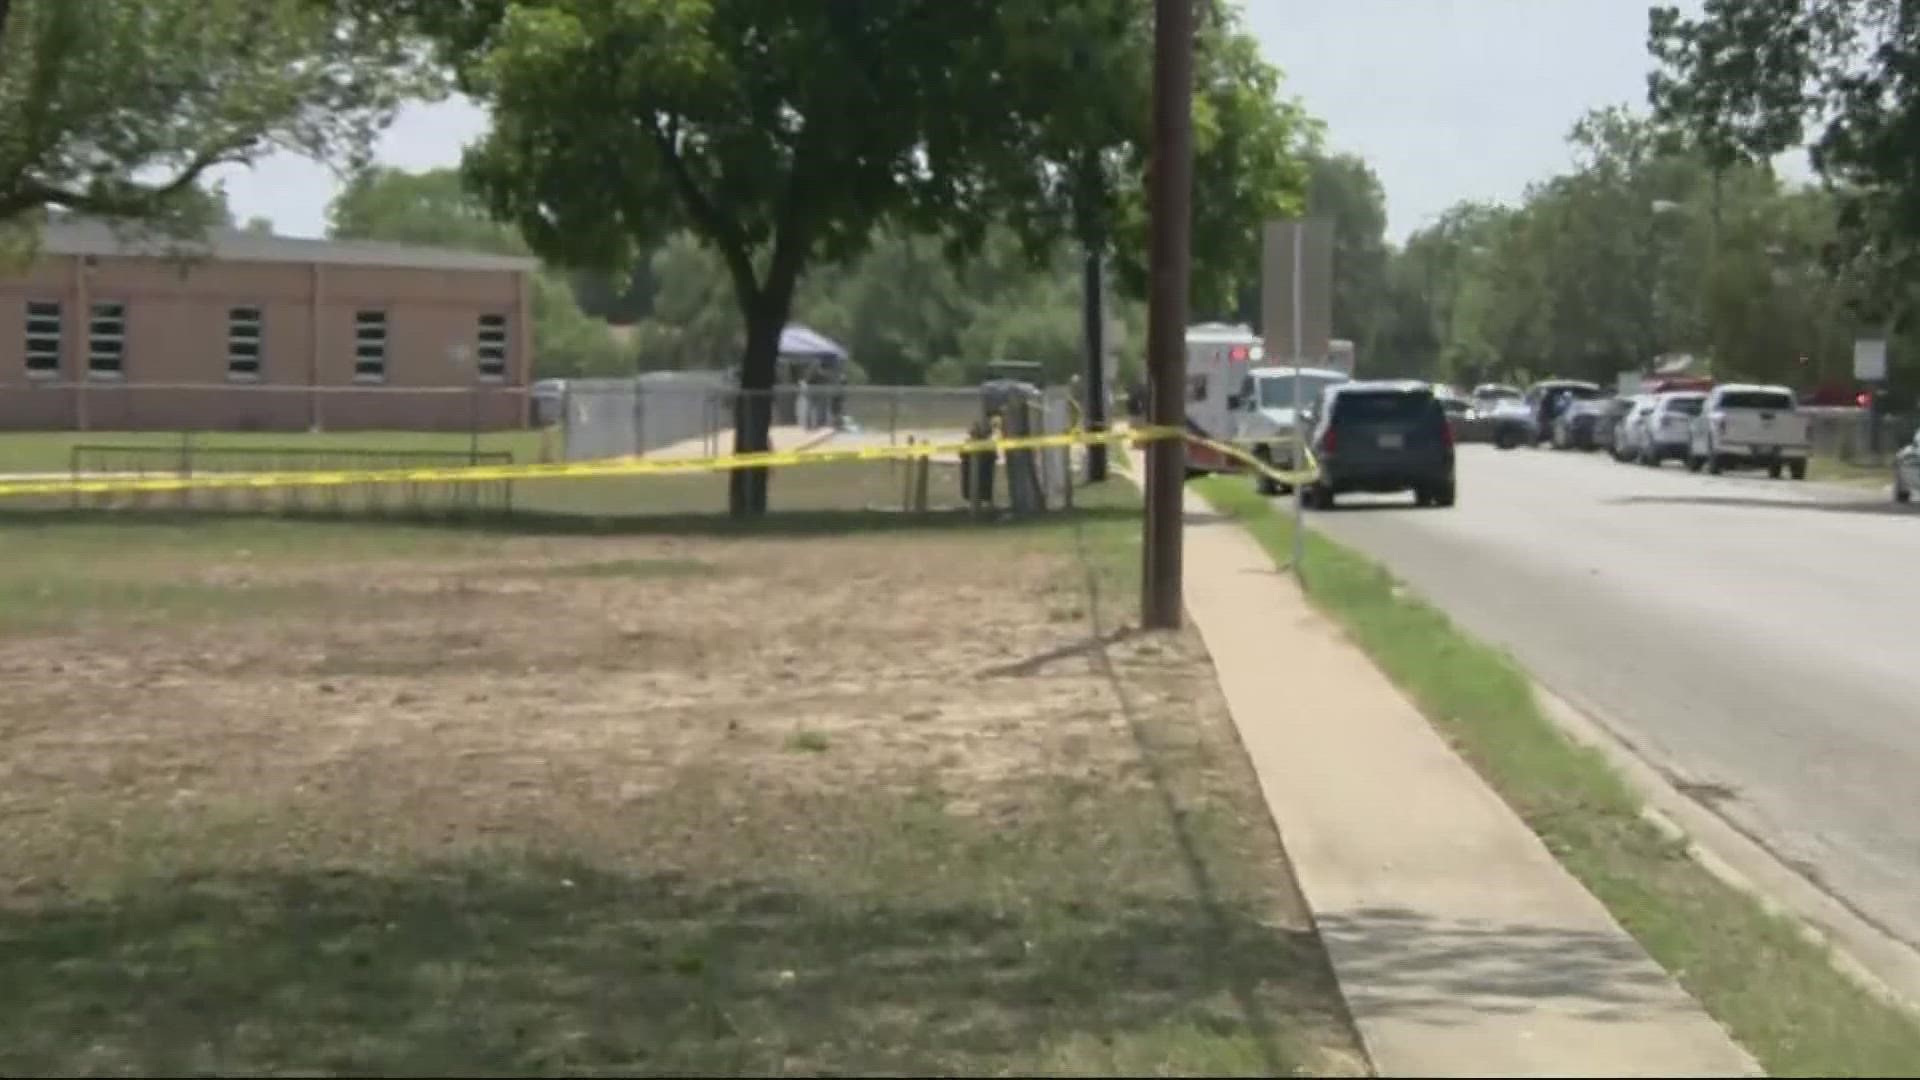 A teacher and 14 students are dead after an active shooter situation was reported at a Uvalde, Texas elementary school Tuesday, Texas Governor Greg Abbott said.